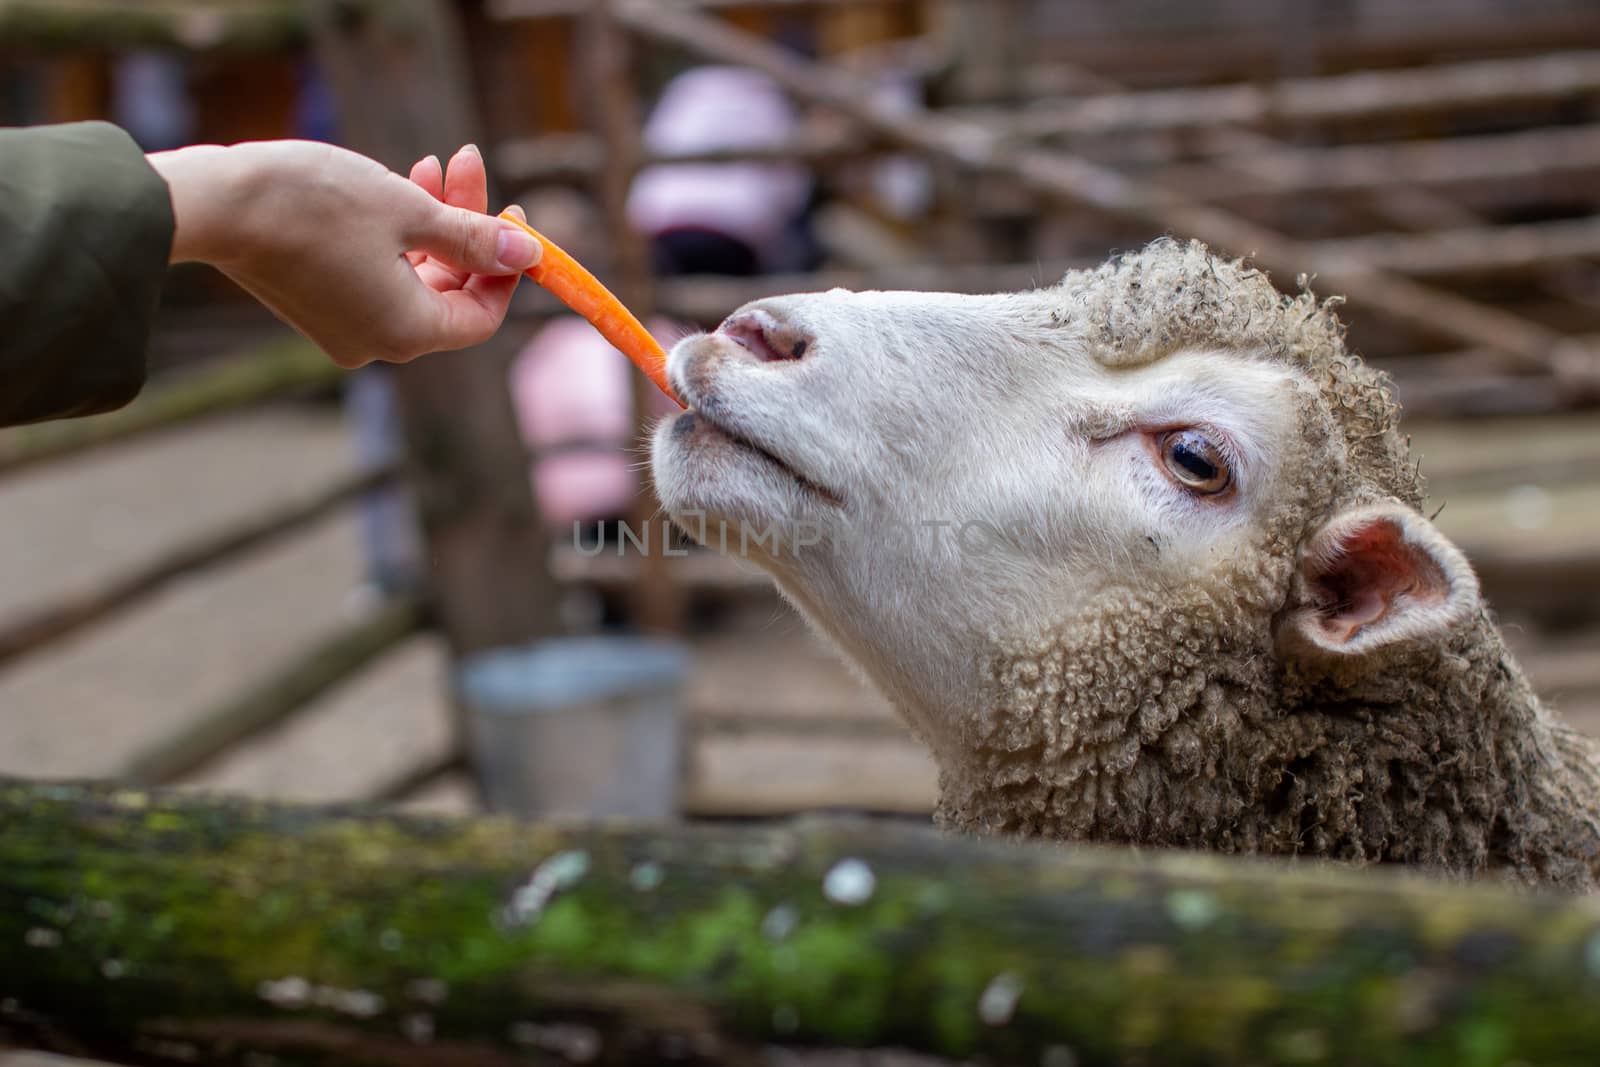 A man feeds white sheep over a fence. Sheep poke their heads through a gap in a wooden fence